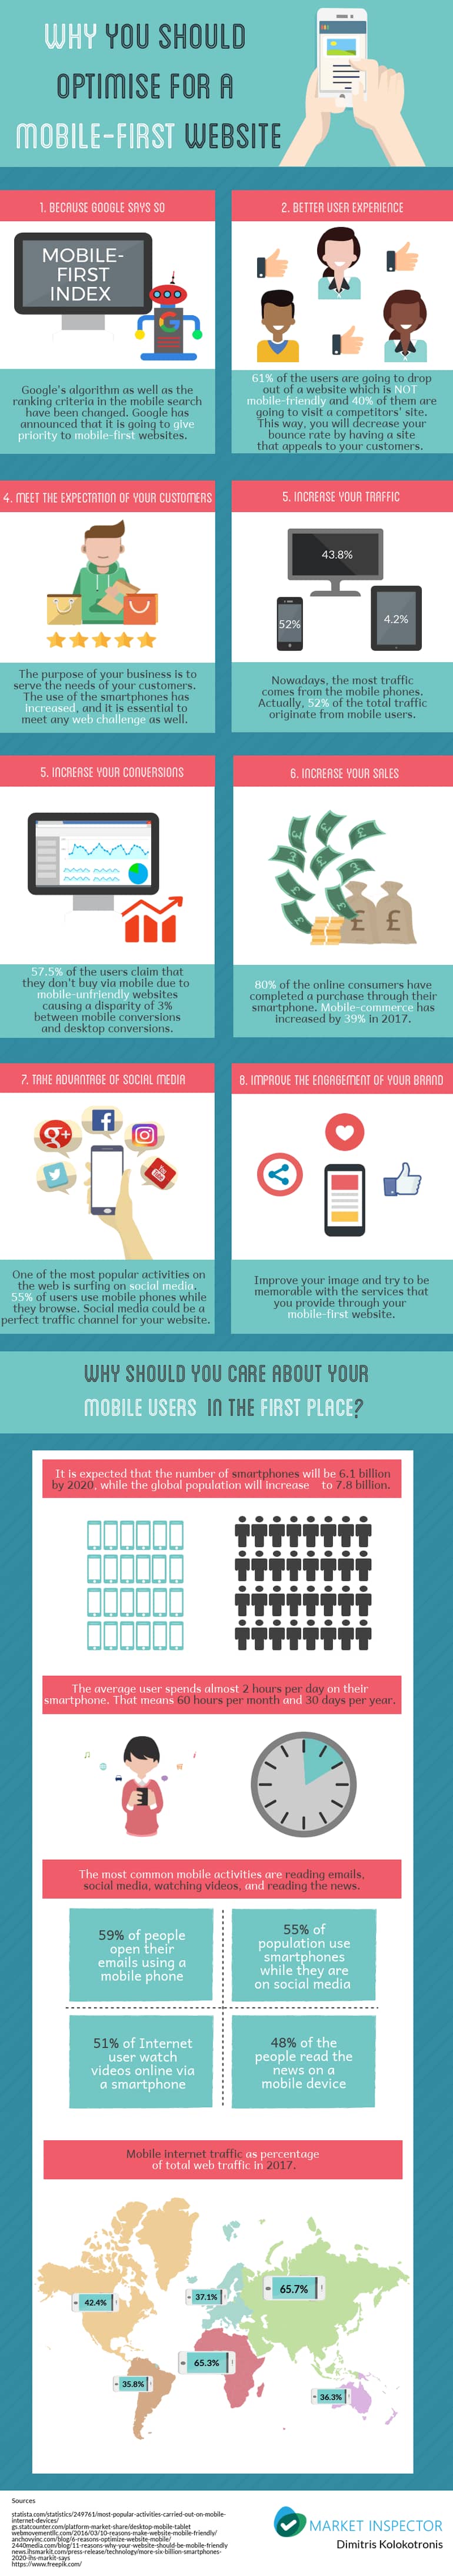 Mobile First Infographic